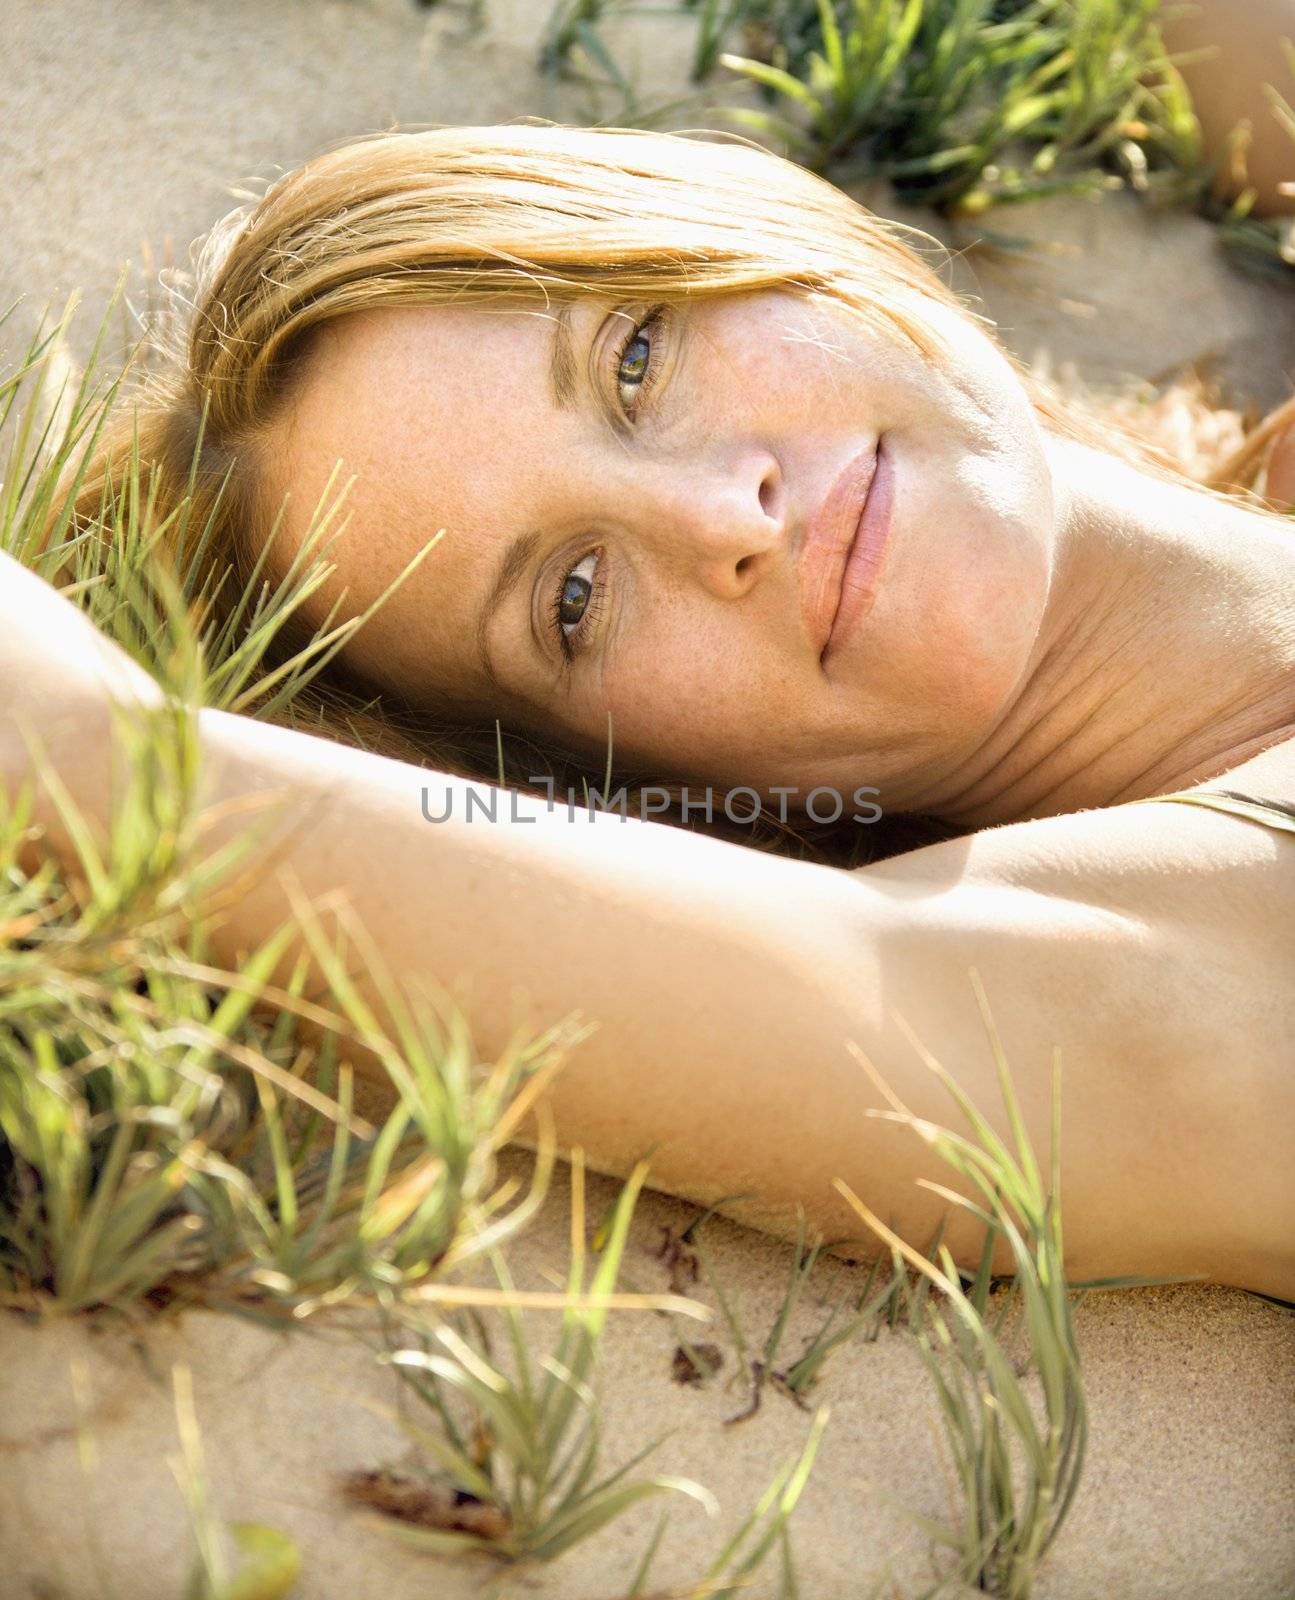 Close up portrait of attractive redheaded woman lying in grassy sand looking at viewer.